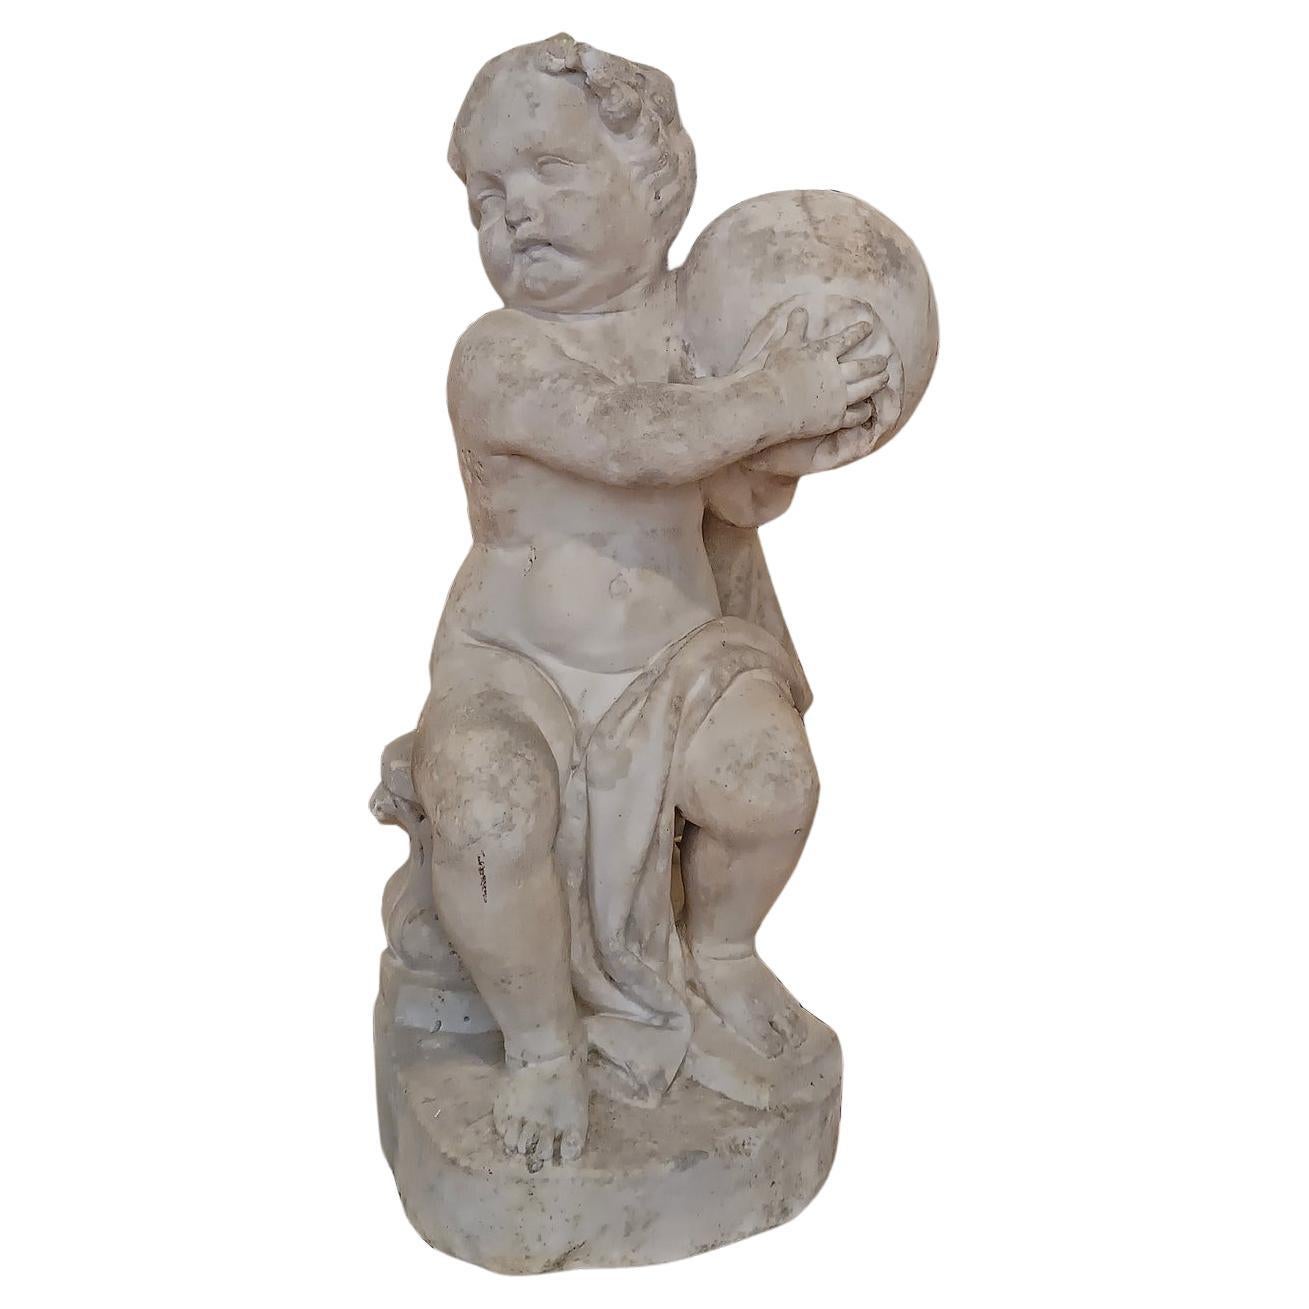 16th CENTURY MARBLE SCULPTURE OF A YOUNG HERCULES 